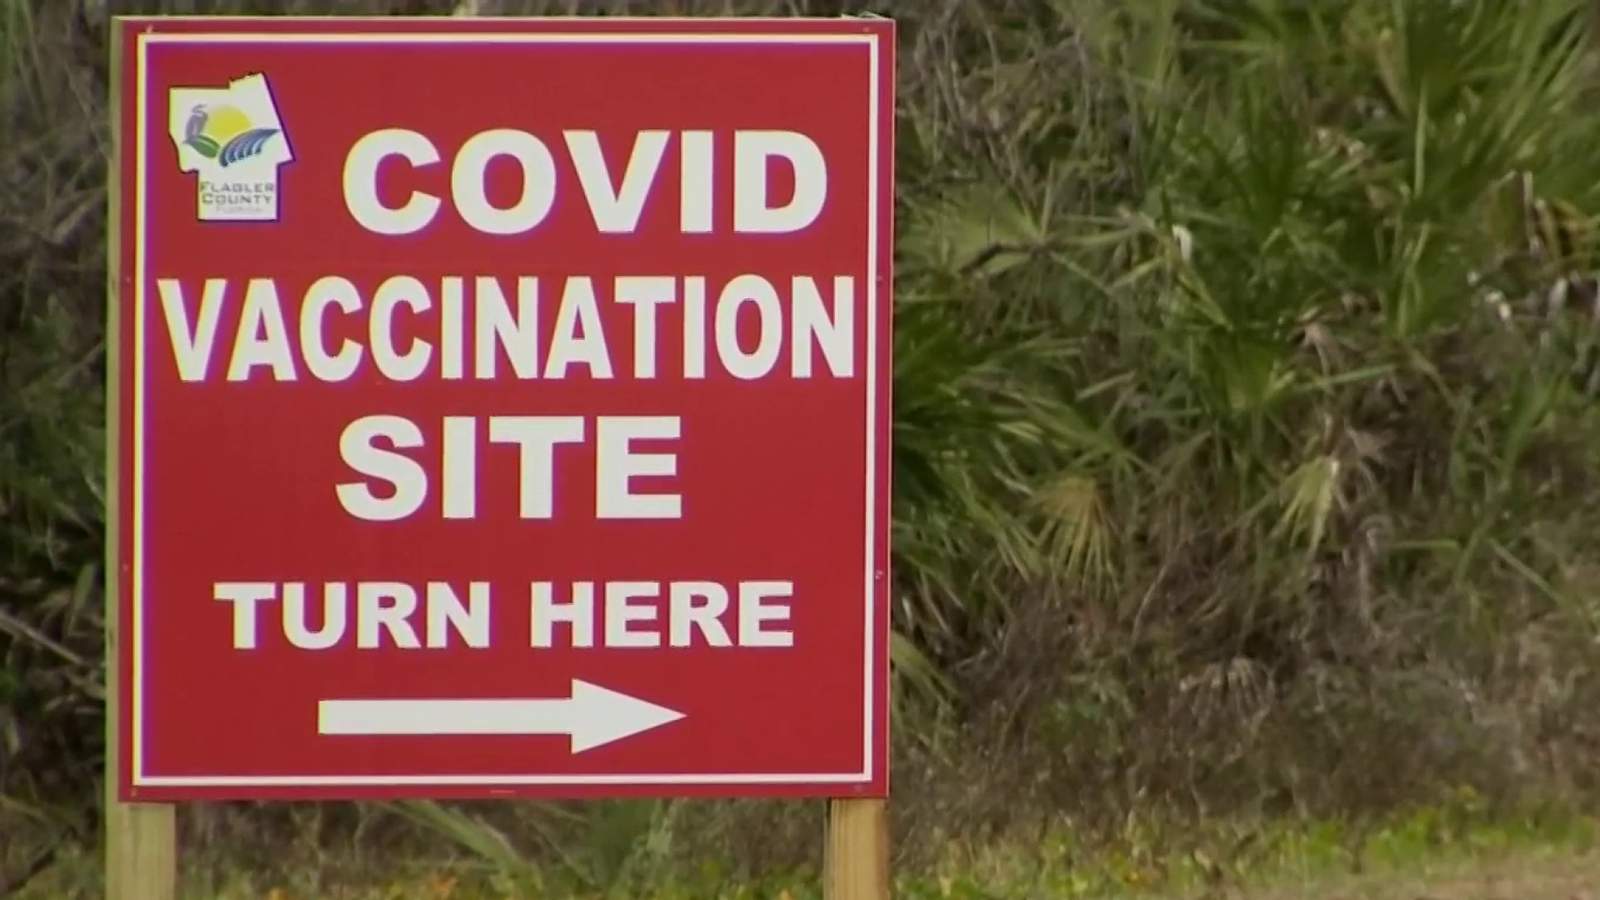 Brevard teachers, substitutes over 65 will get vaccine this weekend, BPS says